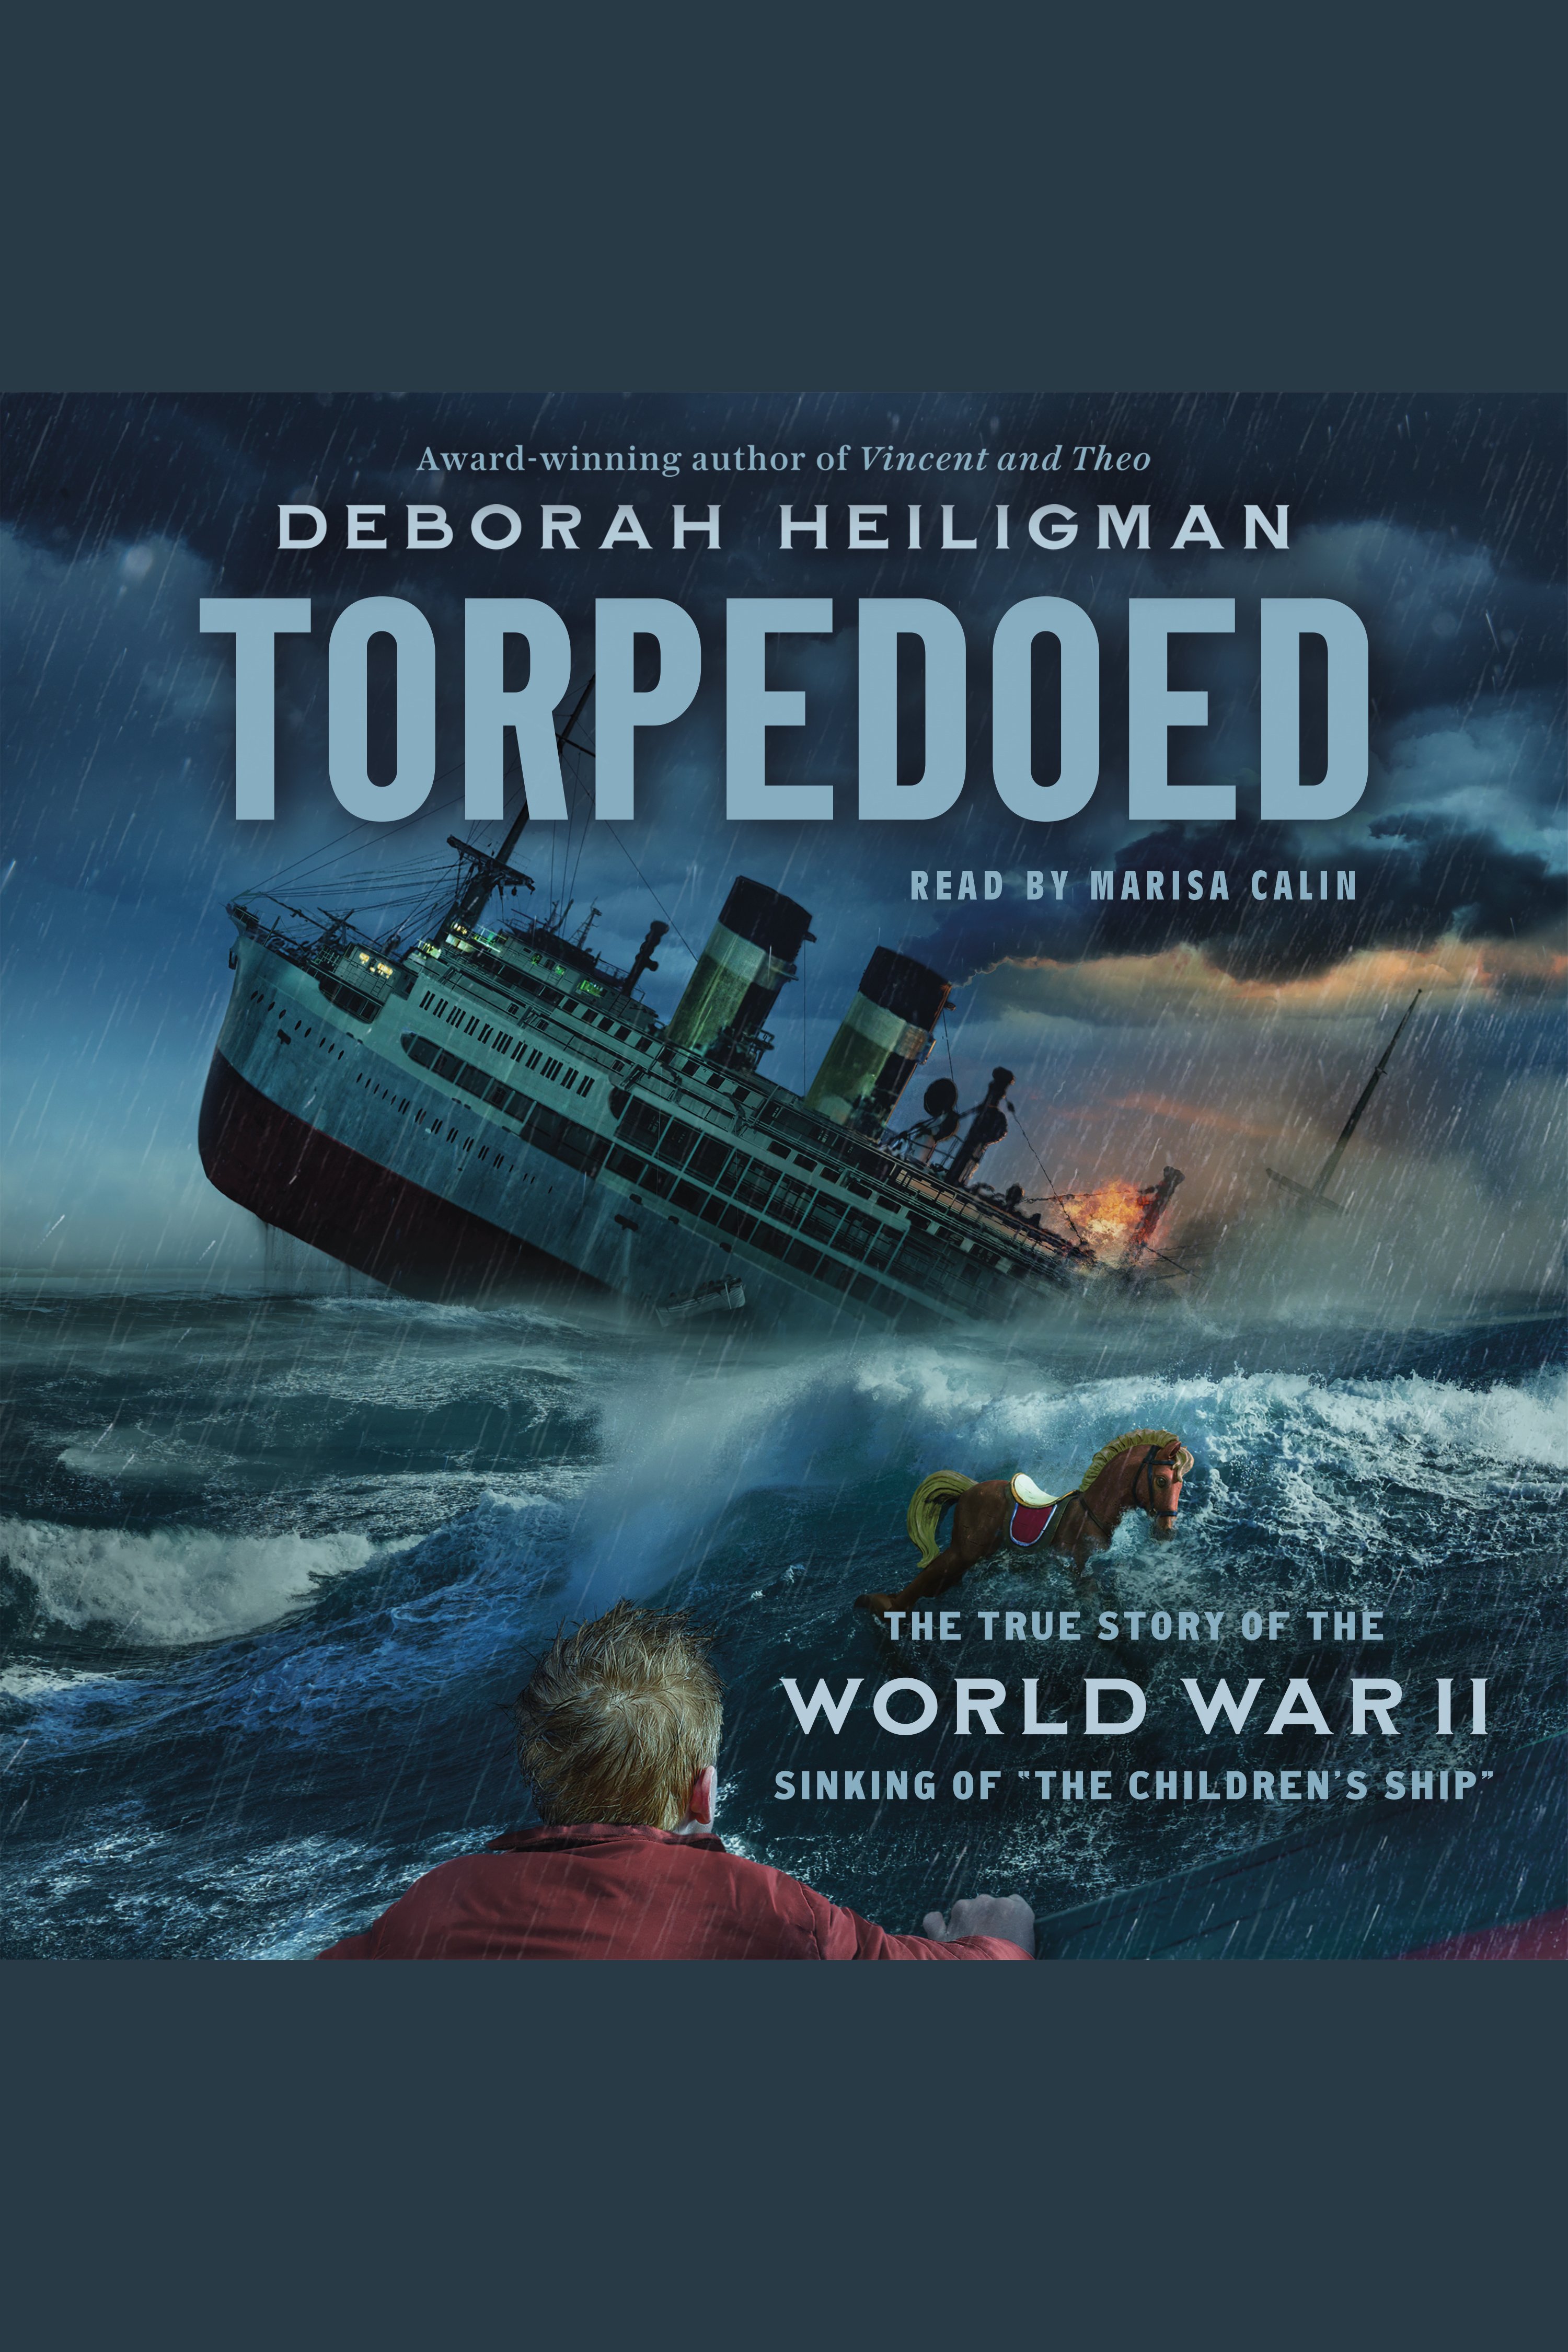 Torpedoed the true story of the World War II sinking of "The Children's Ship" cover image